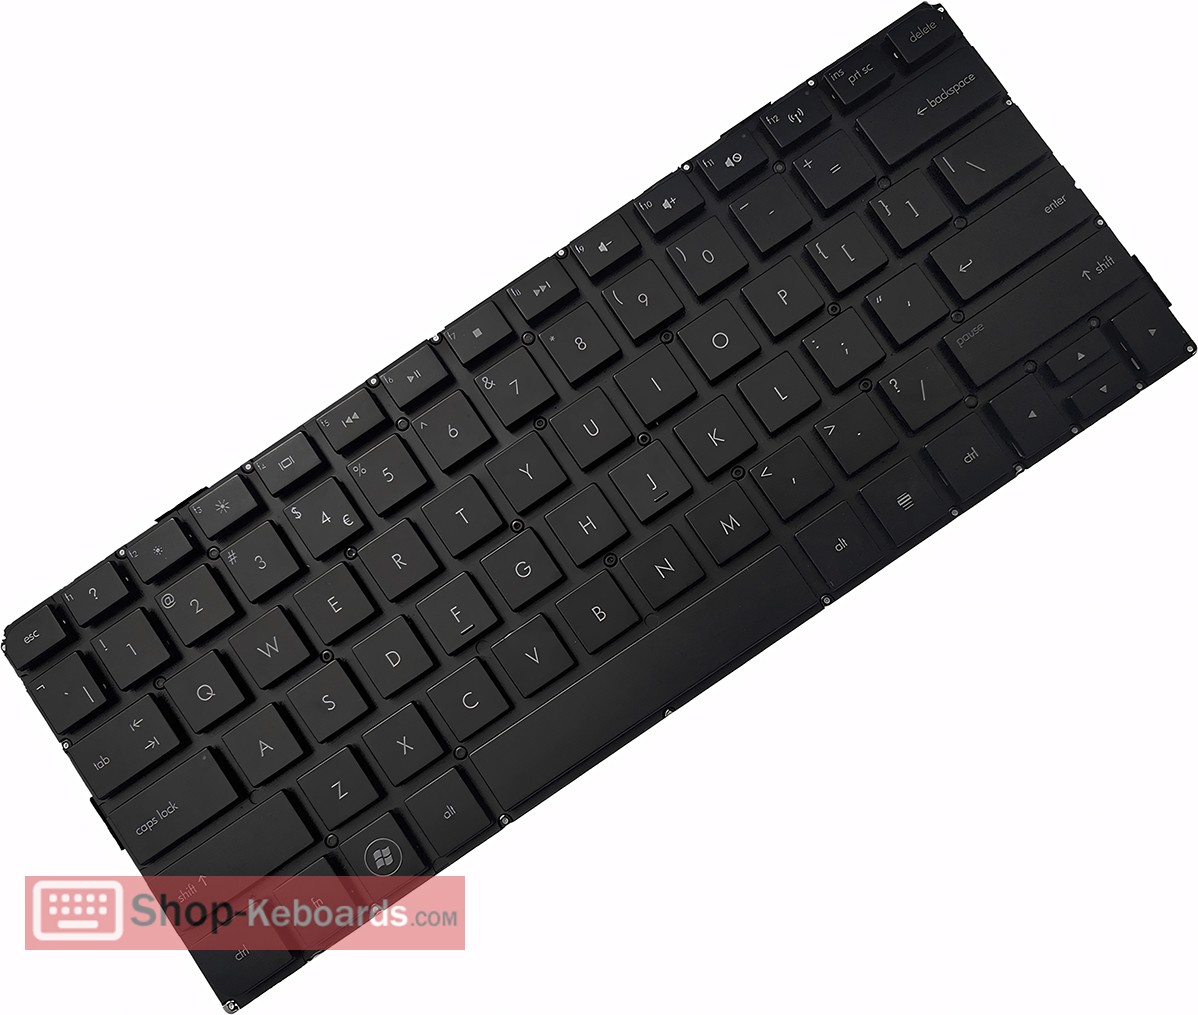 HP ENVY 13-1010ER  Keyboard replacement